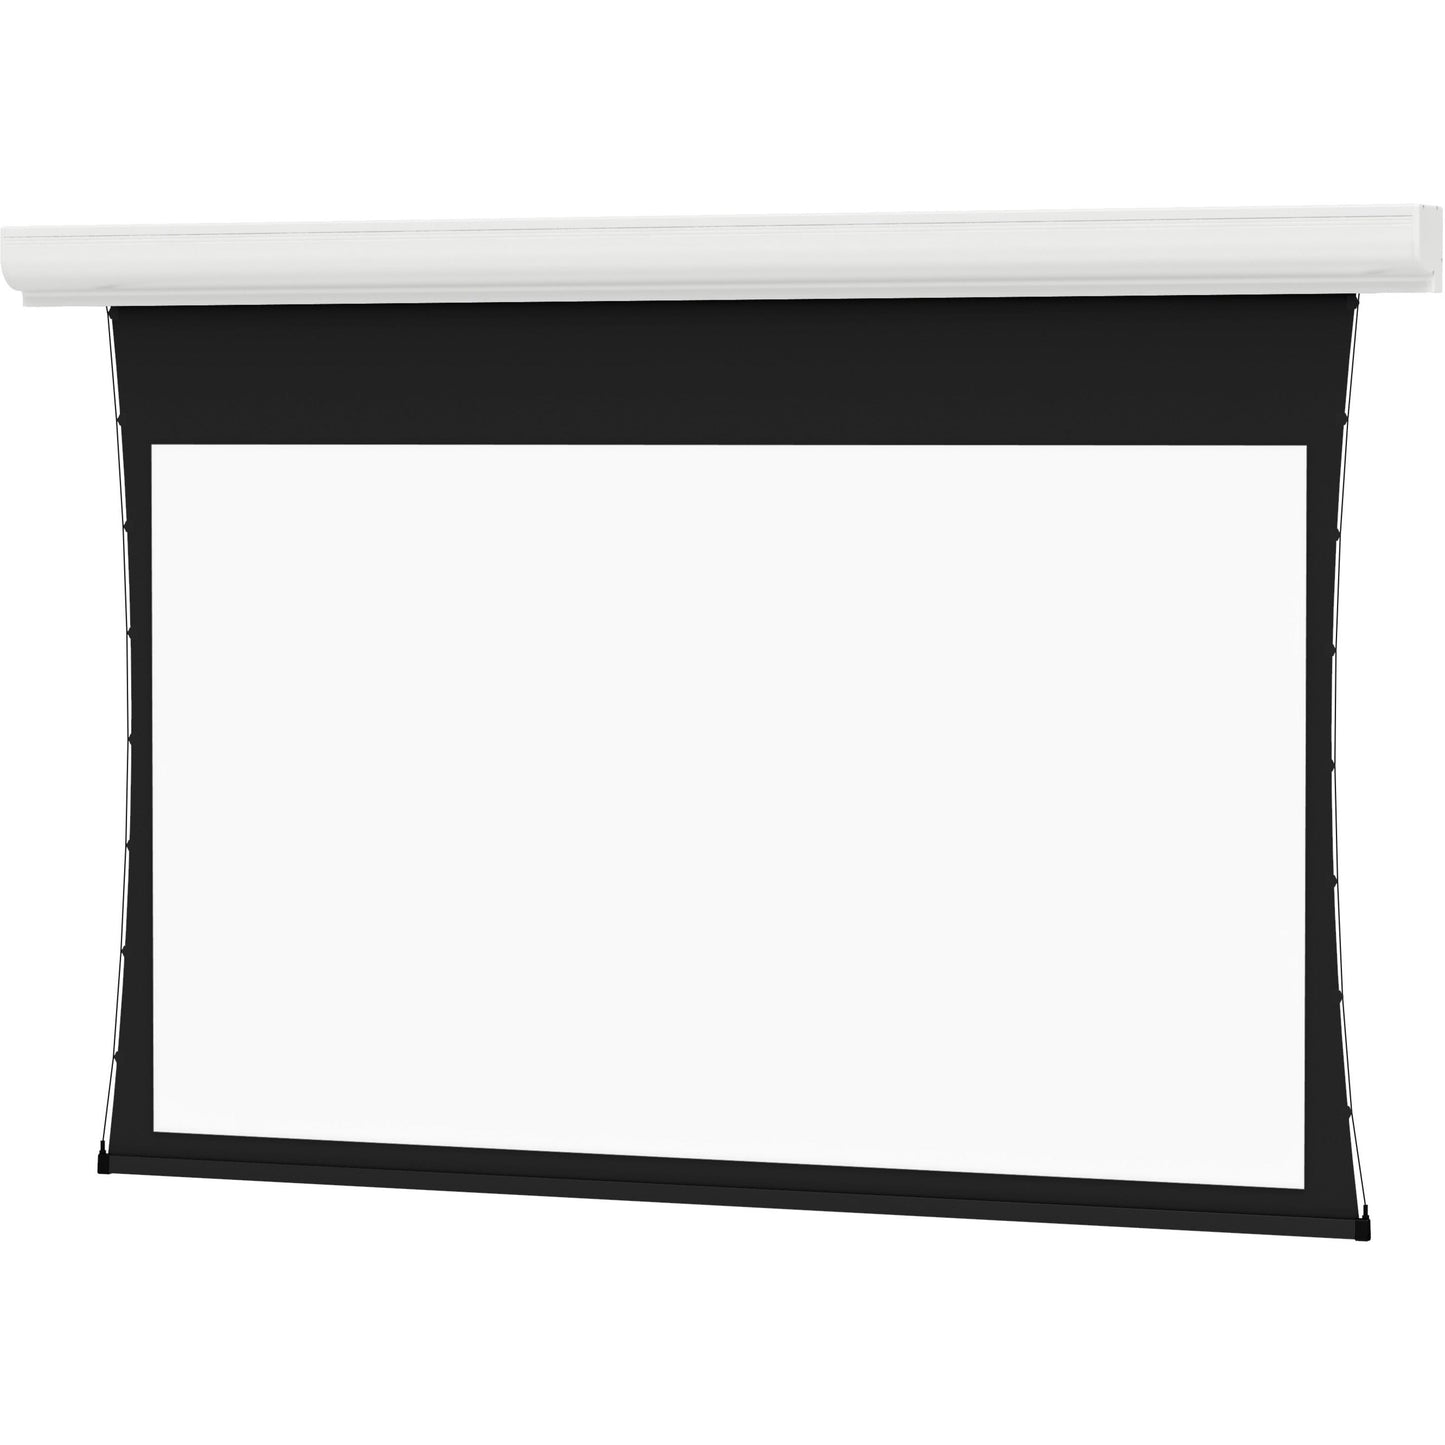 Da-Lite Tensioned Contour Electrol Series Projection Screen - Wall or Ceiling Mounted Electric Screen - 137" Screen